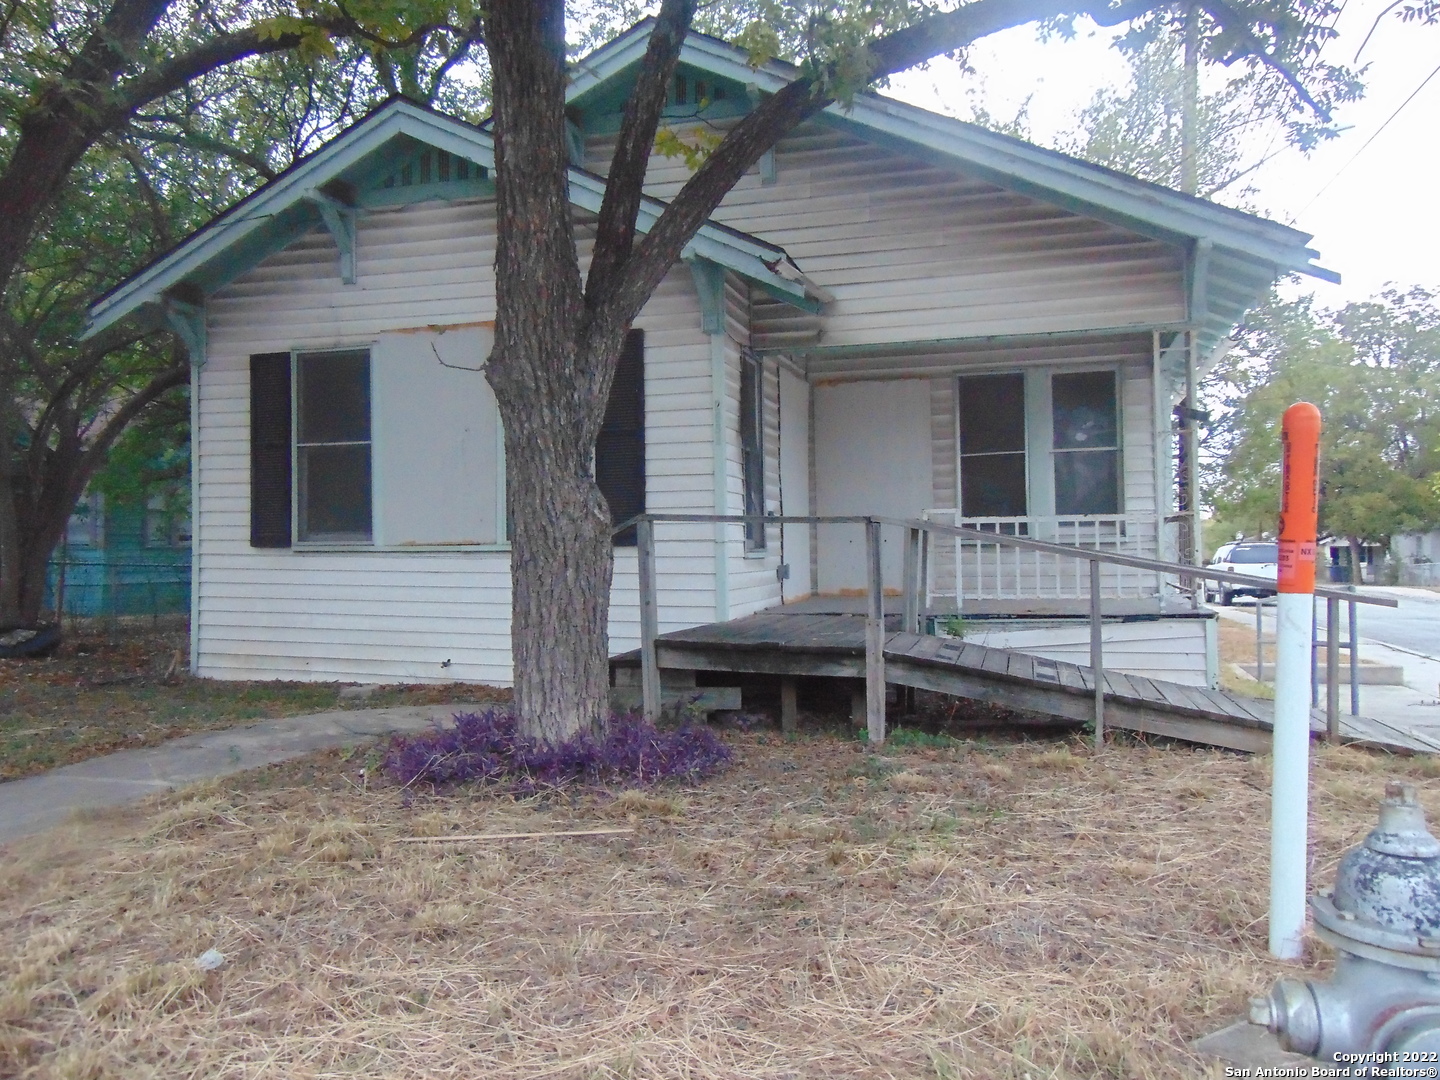 This investor home has lots of potential.   LOCATION, LOCATION, LOCATION!!!!   Rehab work has been started, just needs your vision and some work.     Lots of charm in this home with close proximity to AT&T, The Pearl, and downtown San Antonio.